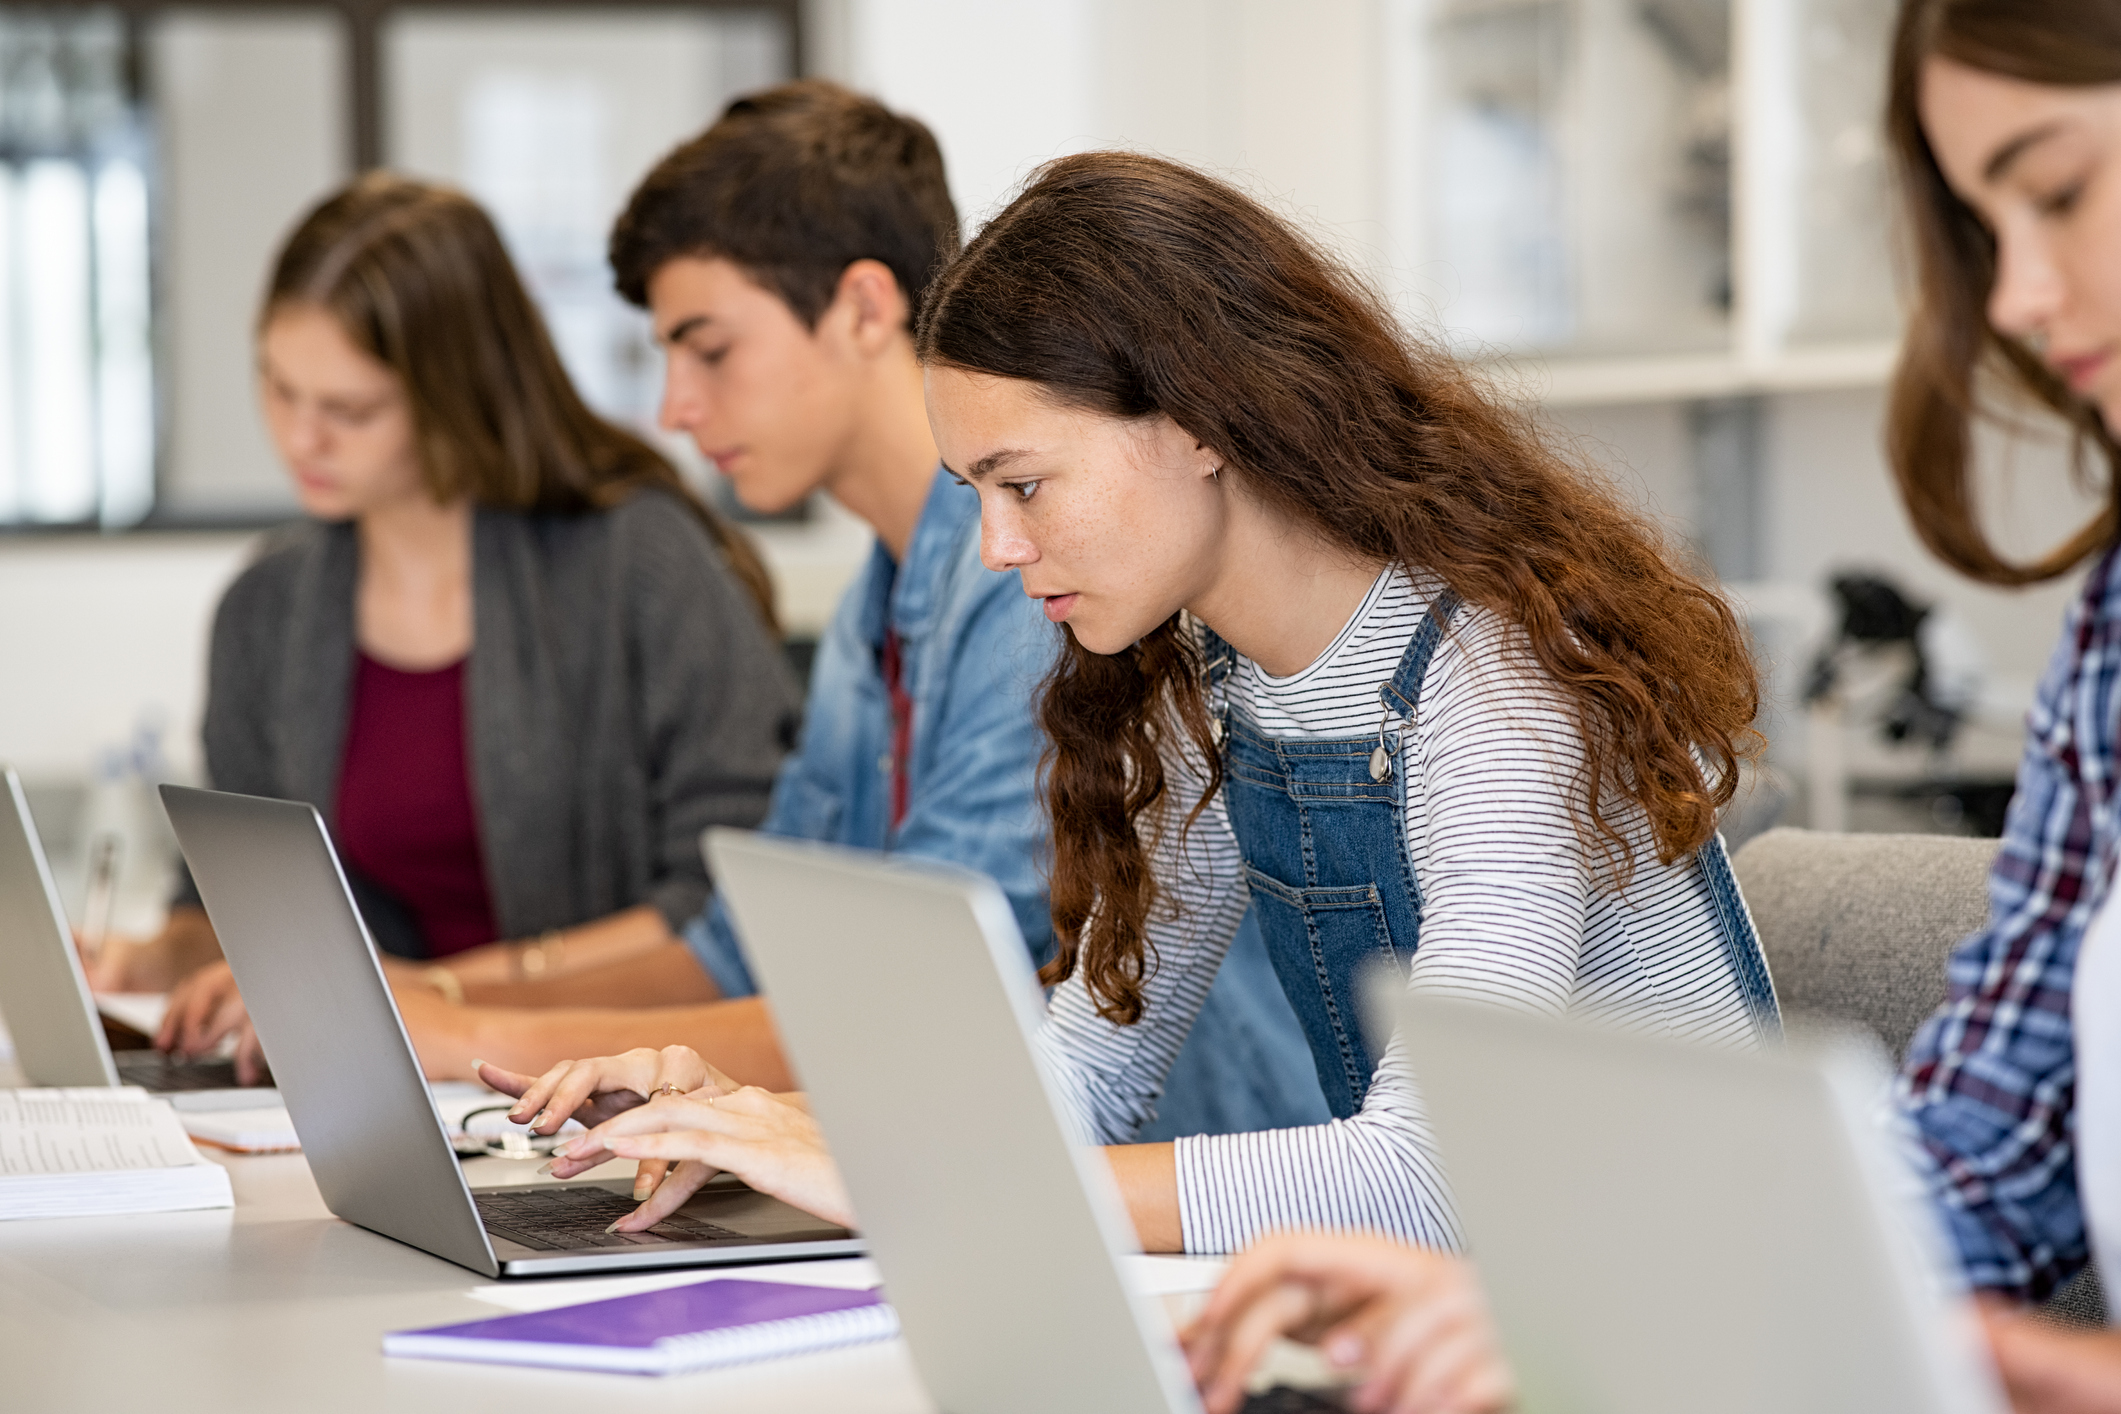 Stock image of students on computers